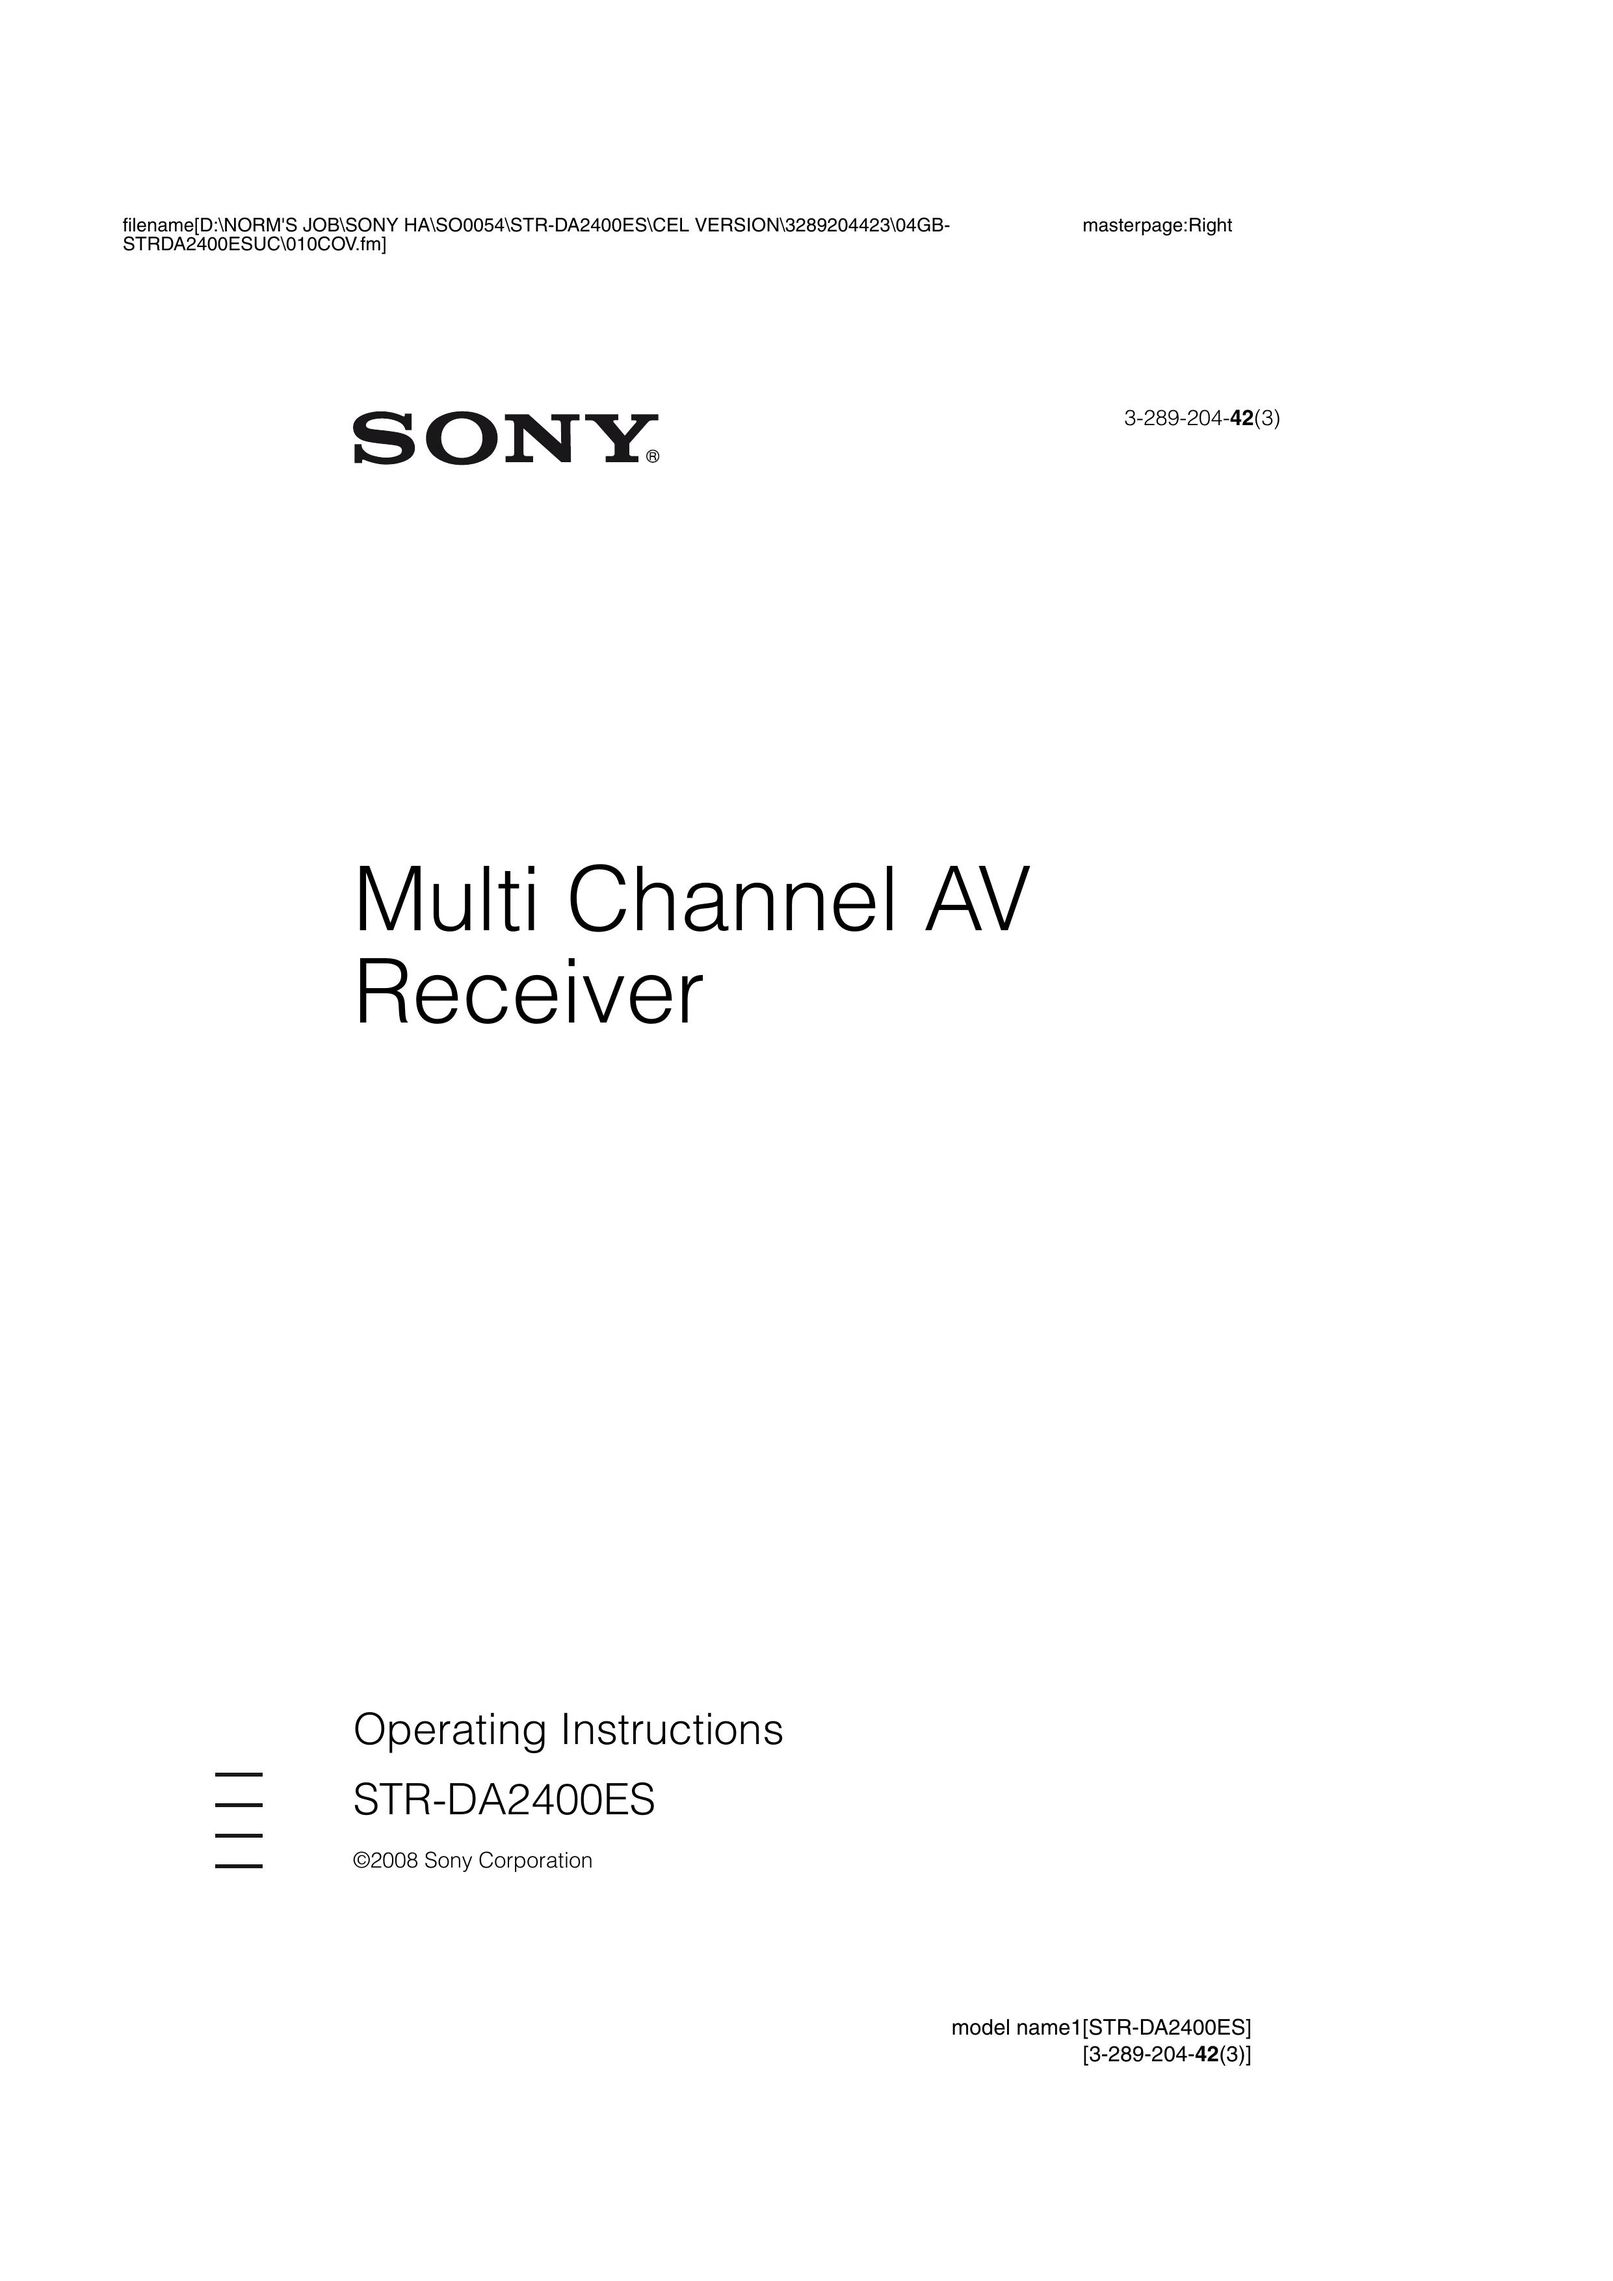 Sony 3-289-204-42(3) Stereo Receiver User Manual